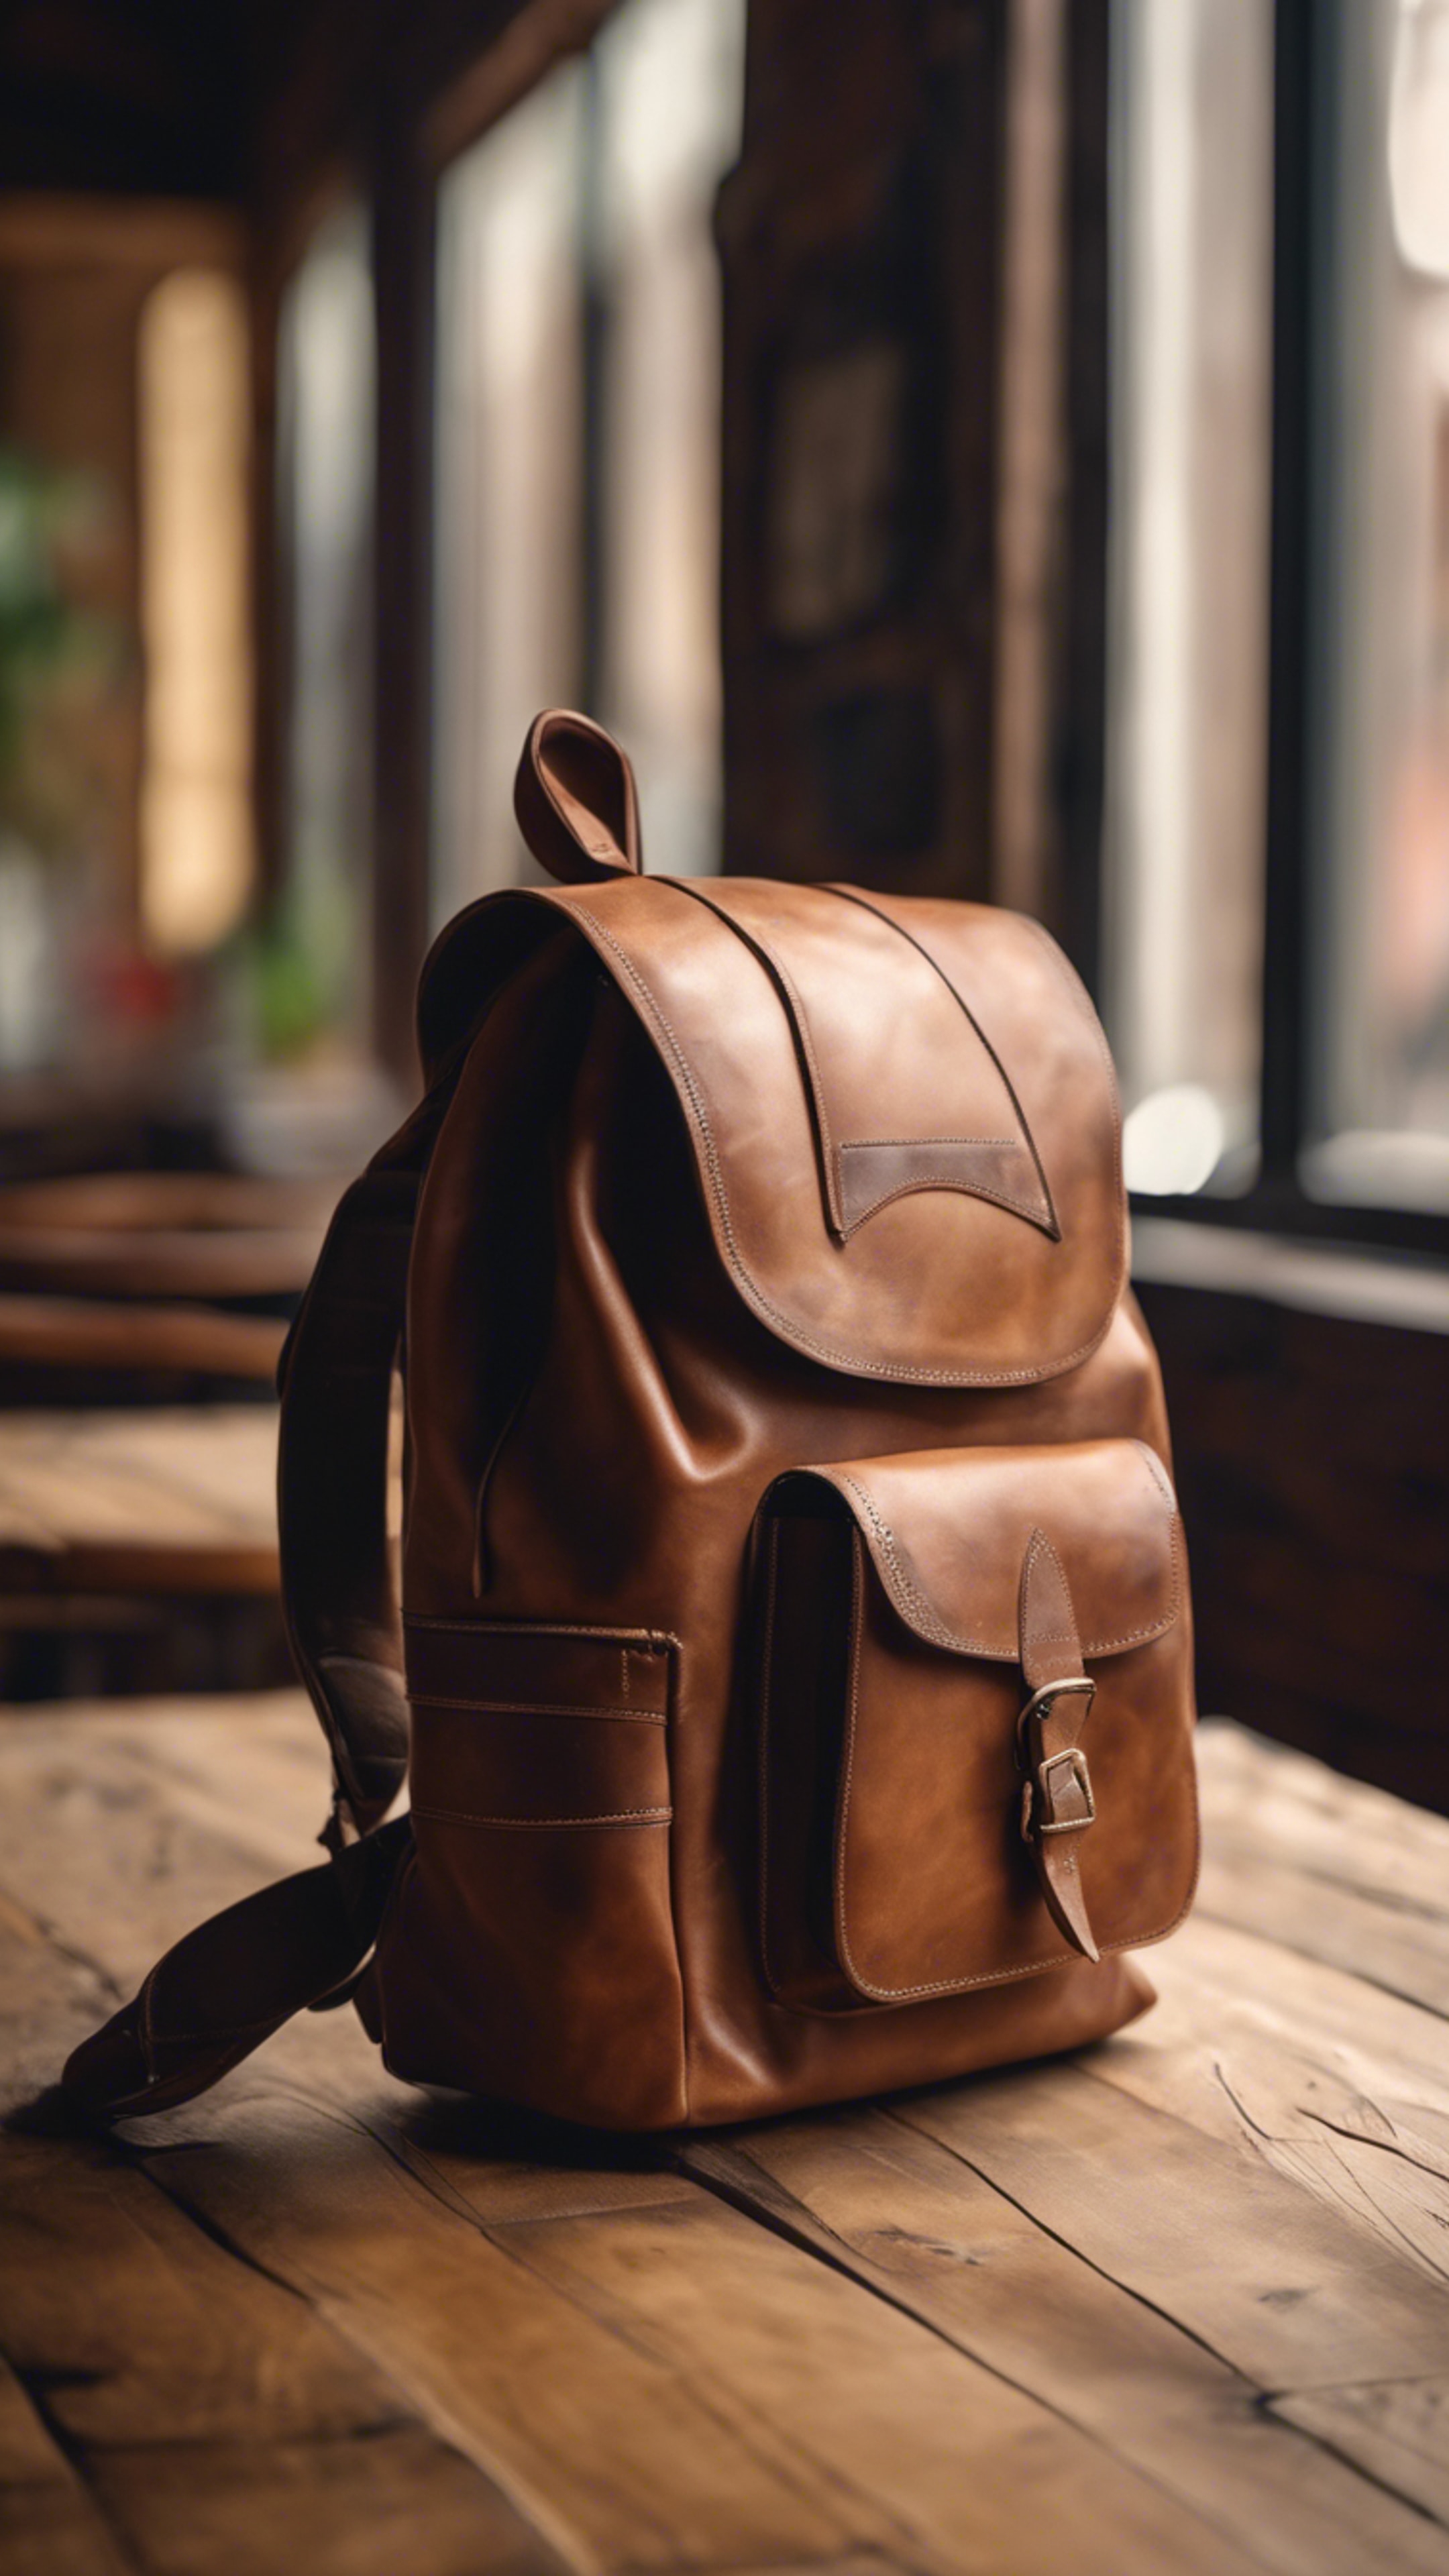 A vintage brown leather backpack sitting on a wooden table in a cozy café. Kertas dinding[7ce12483b5e34217b072]